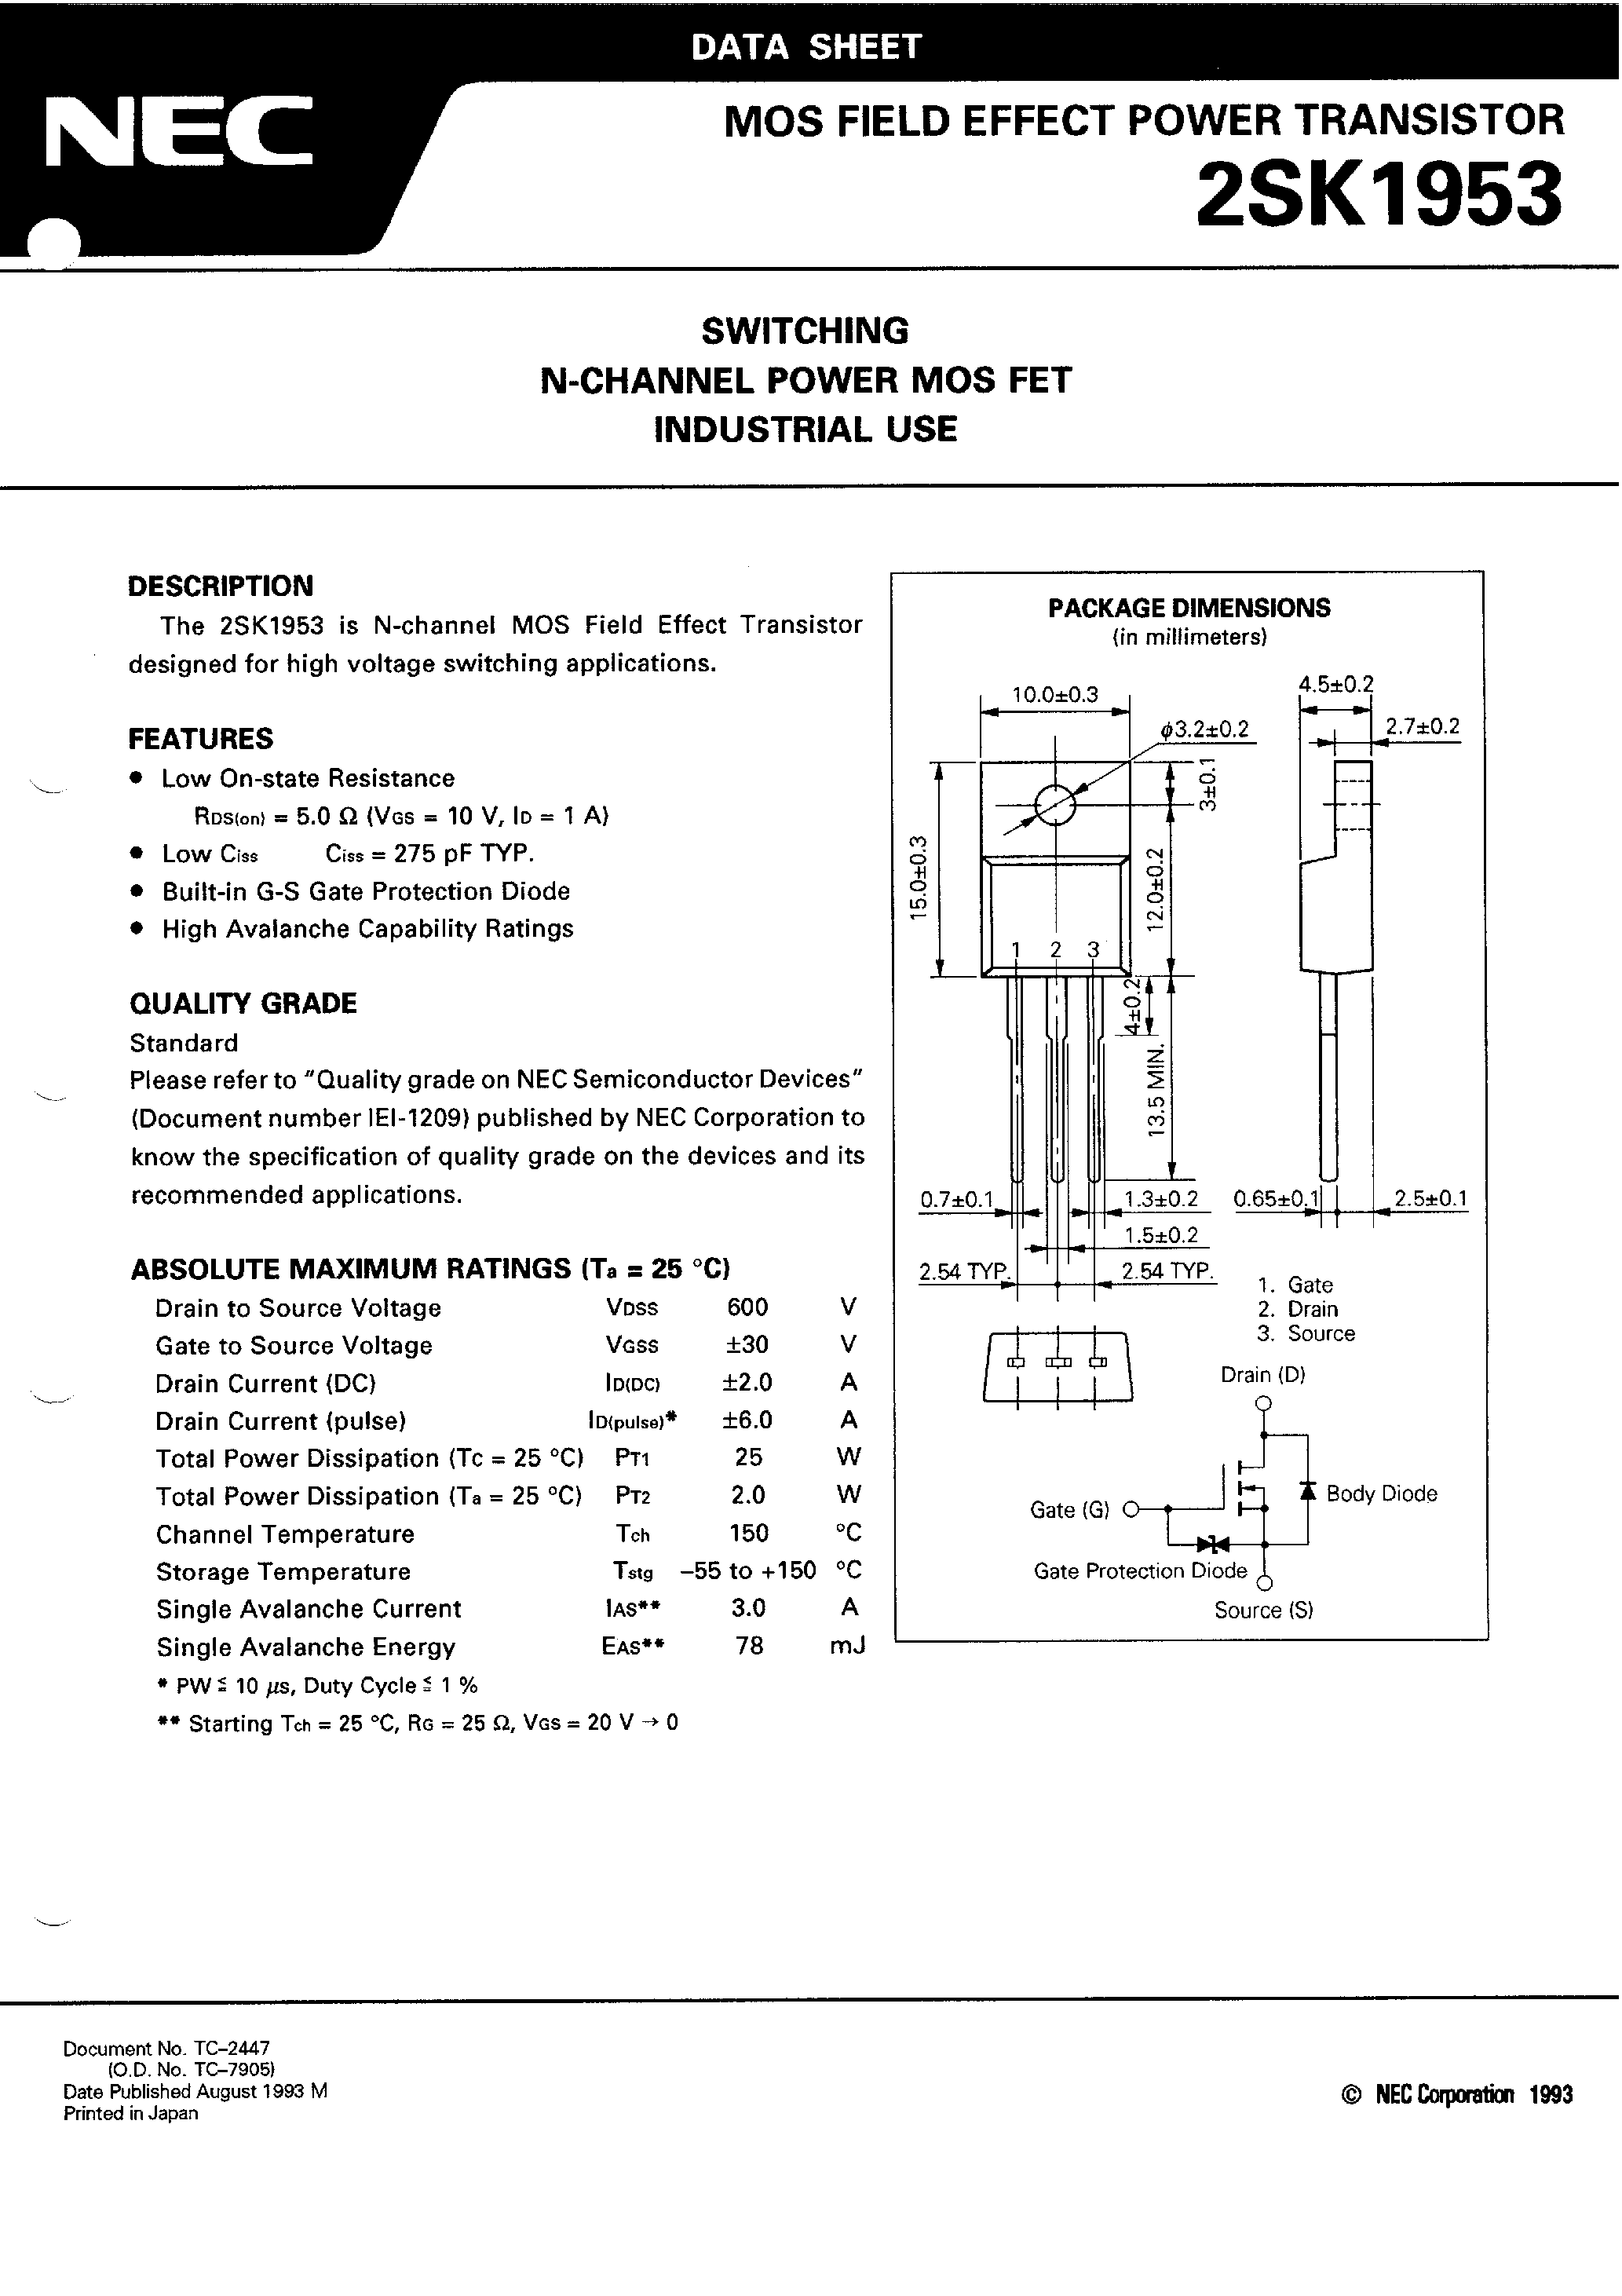 Datasheet K1953 - Search -----> 2SK1953 page 2